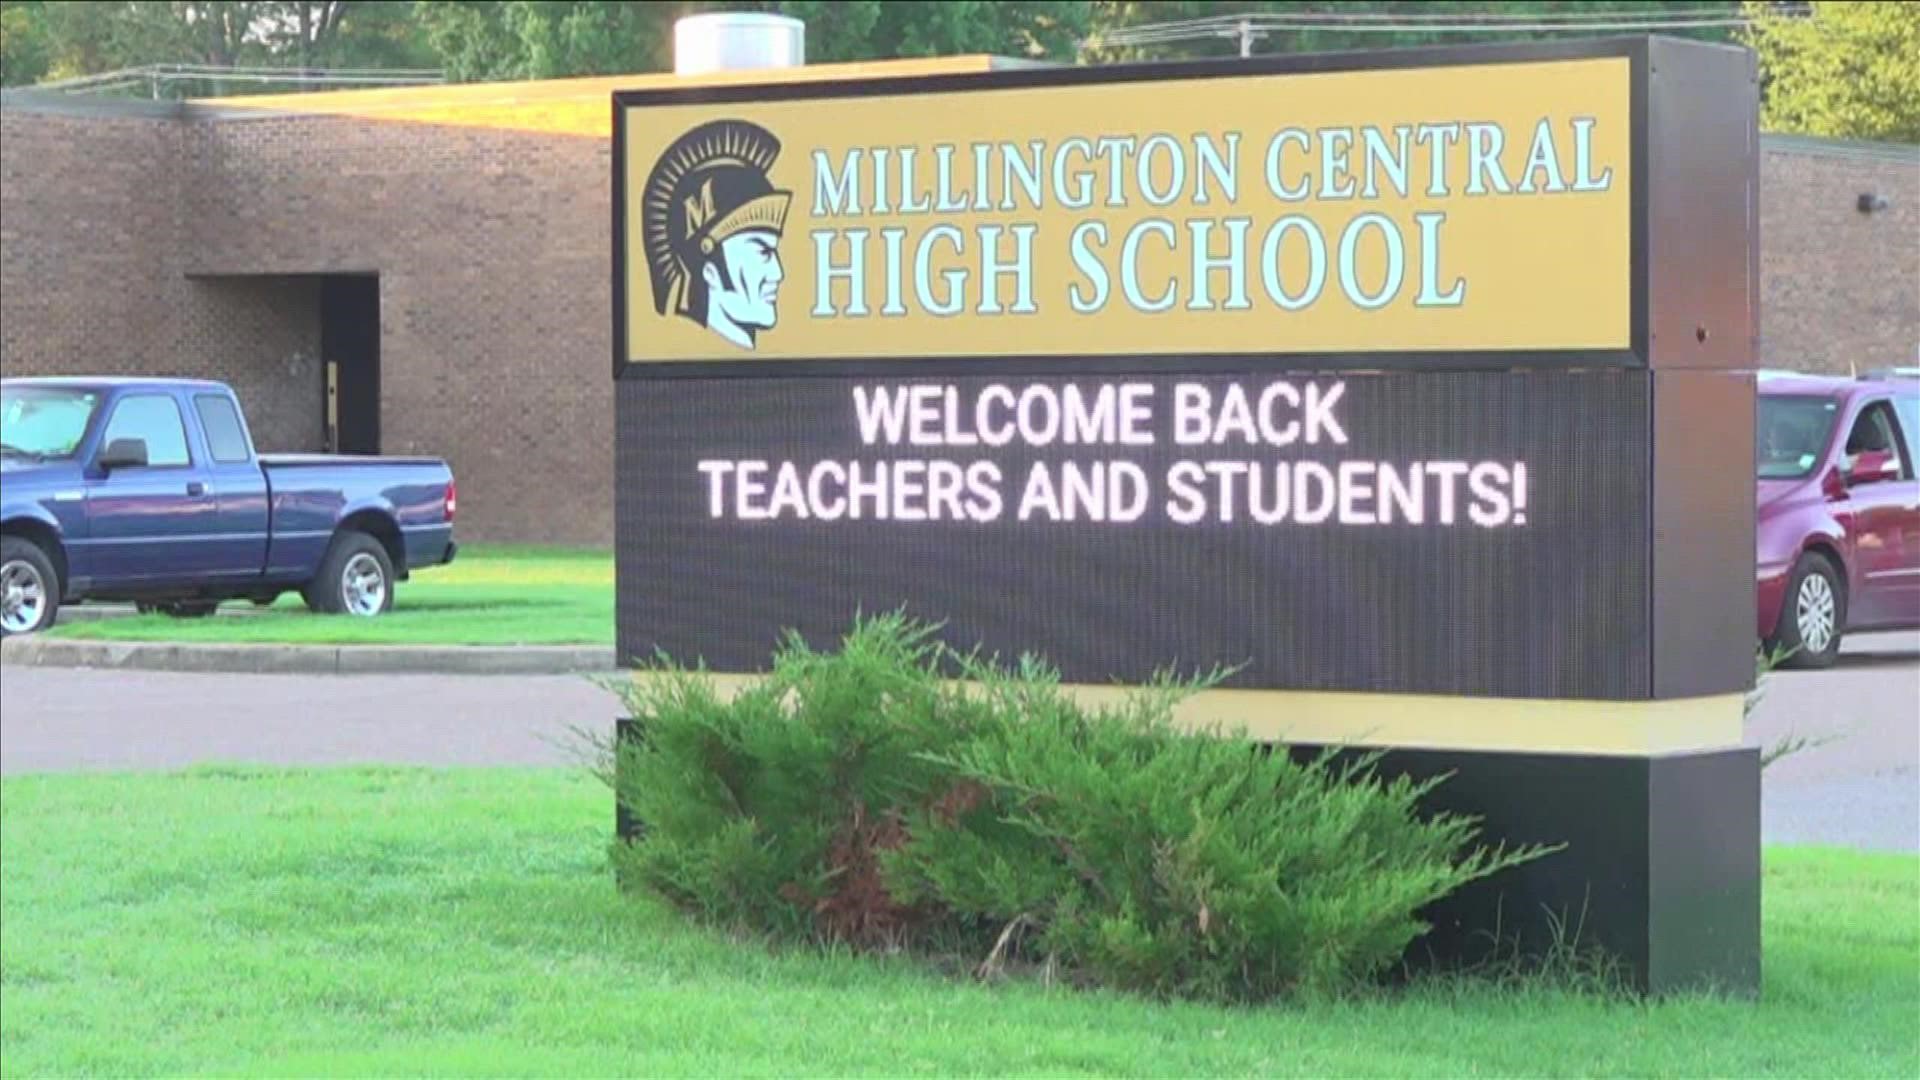 ABC24’s Zaria Oates spent the morning at Millington Central Middle High School to see how they are welcoming students back.